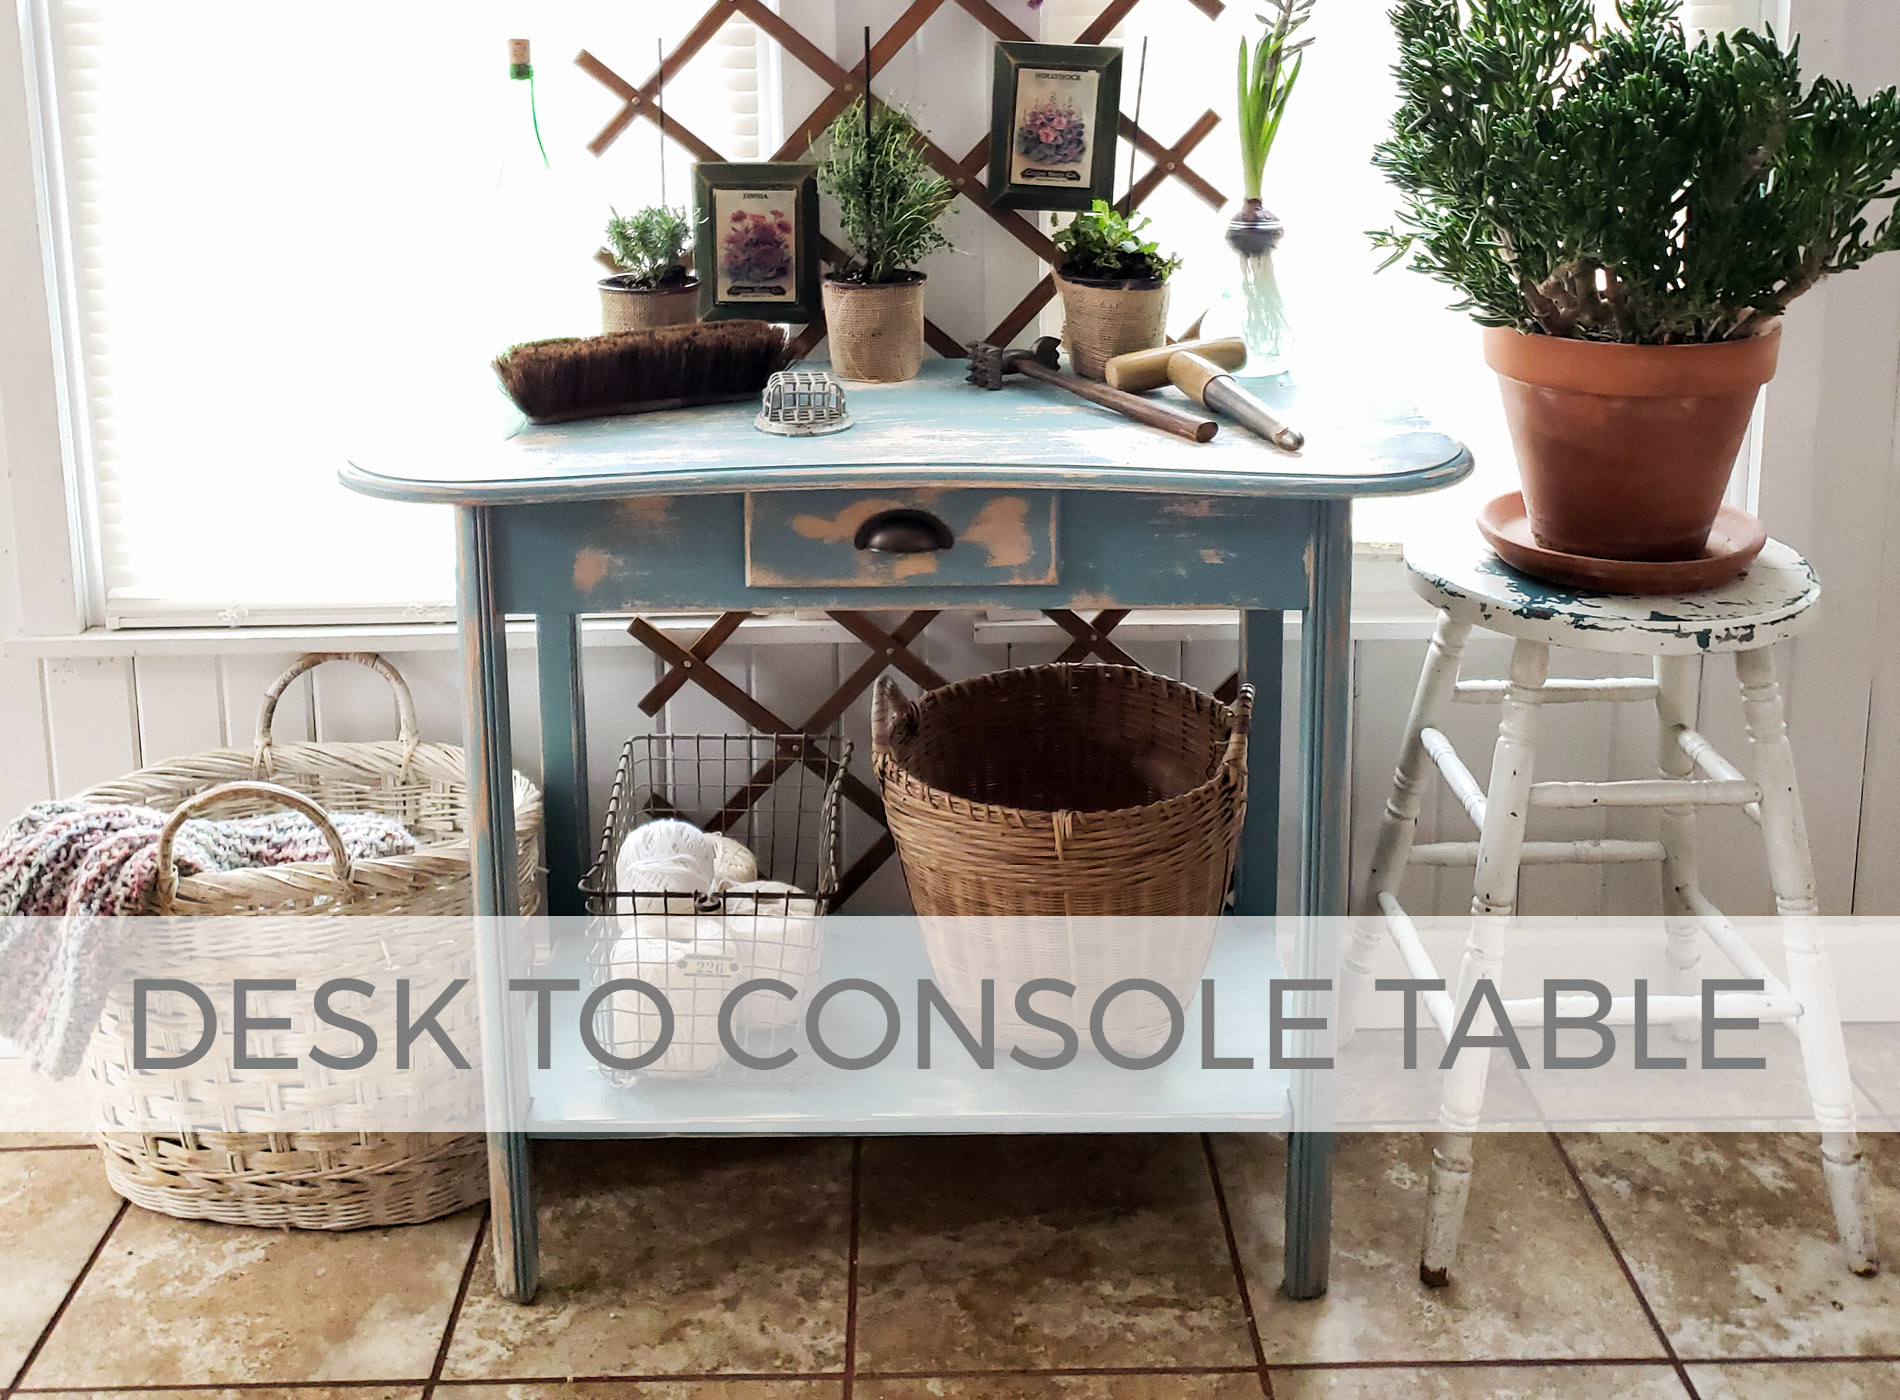 Vintage Desk Upcycled into Console Table by Larissa of Prodigal Pieces | prodigalpieces.com